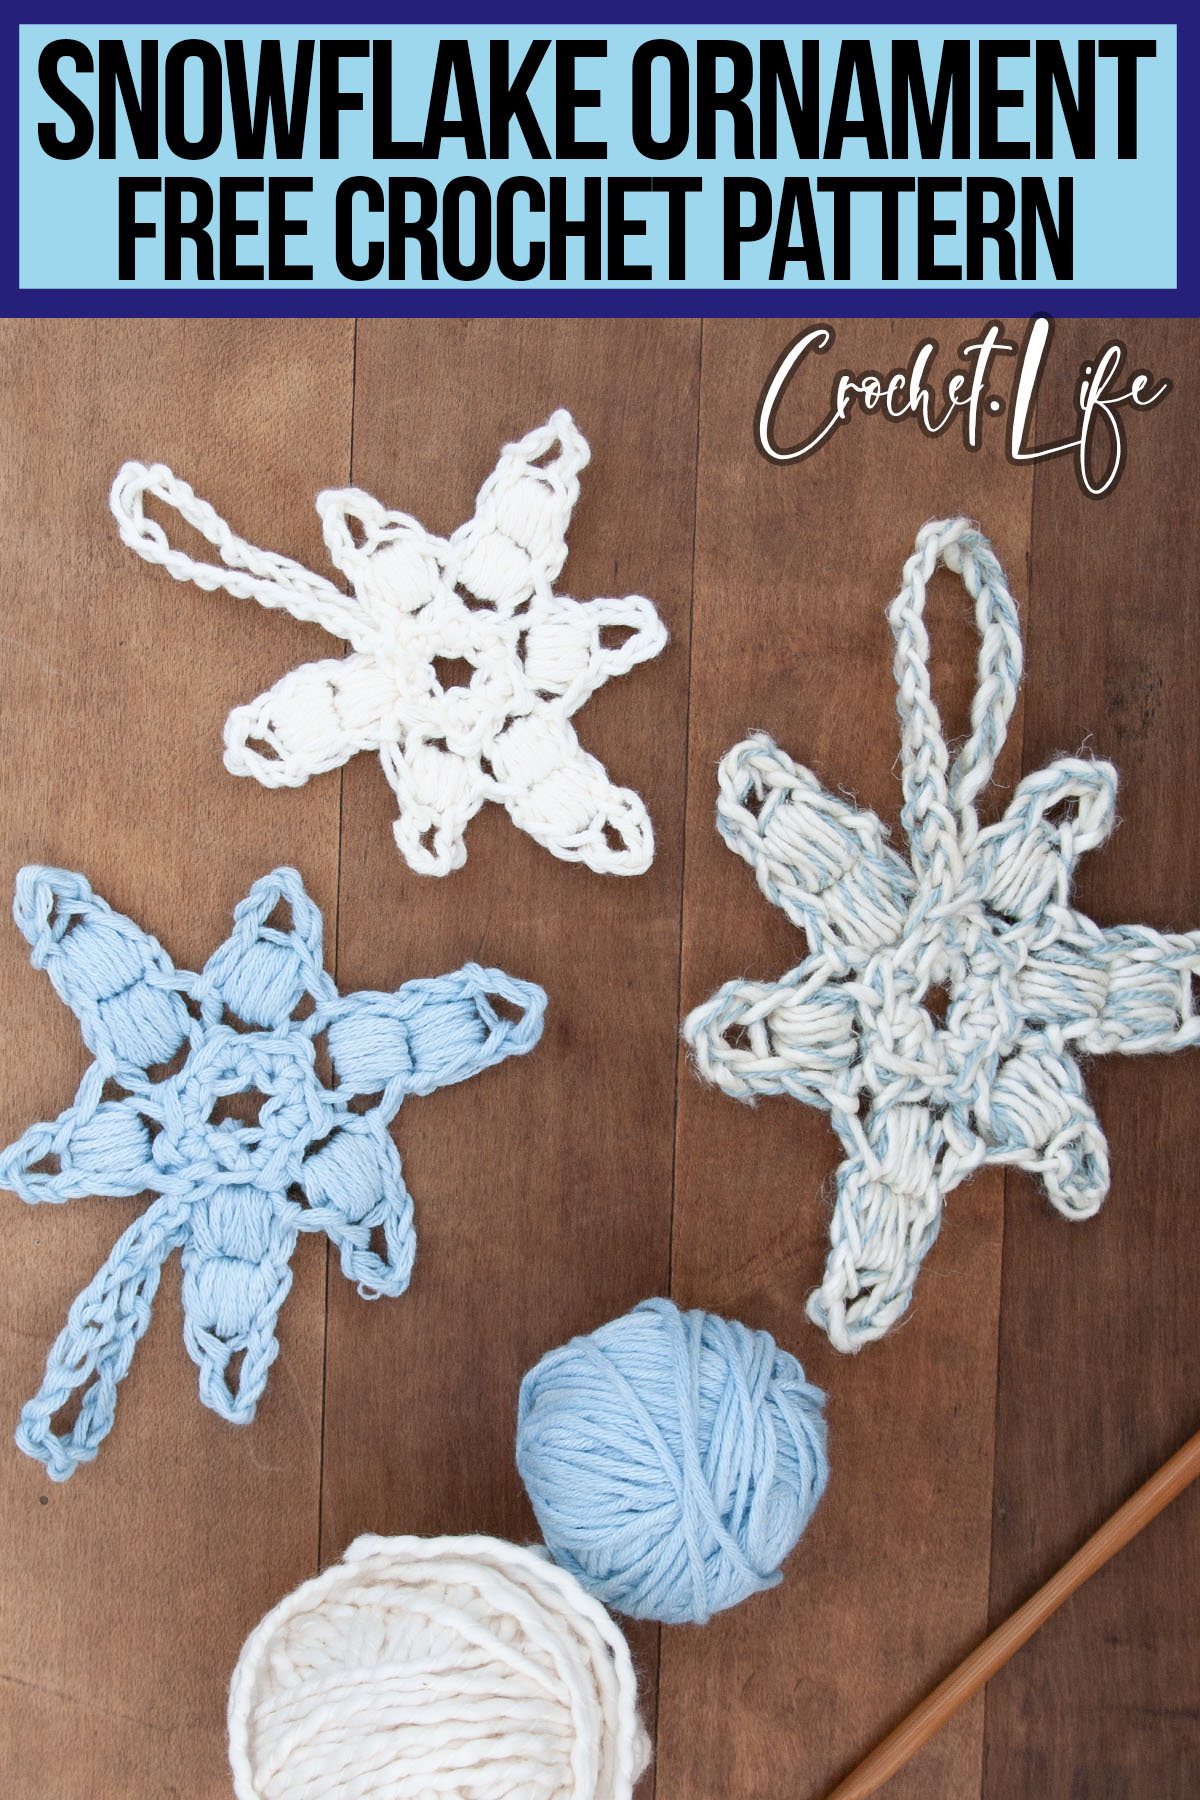 snowflake crochet ornament pattern with text which reads snowflake ornament free crochet pattern